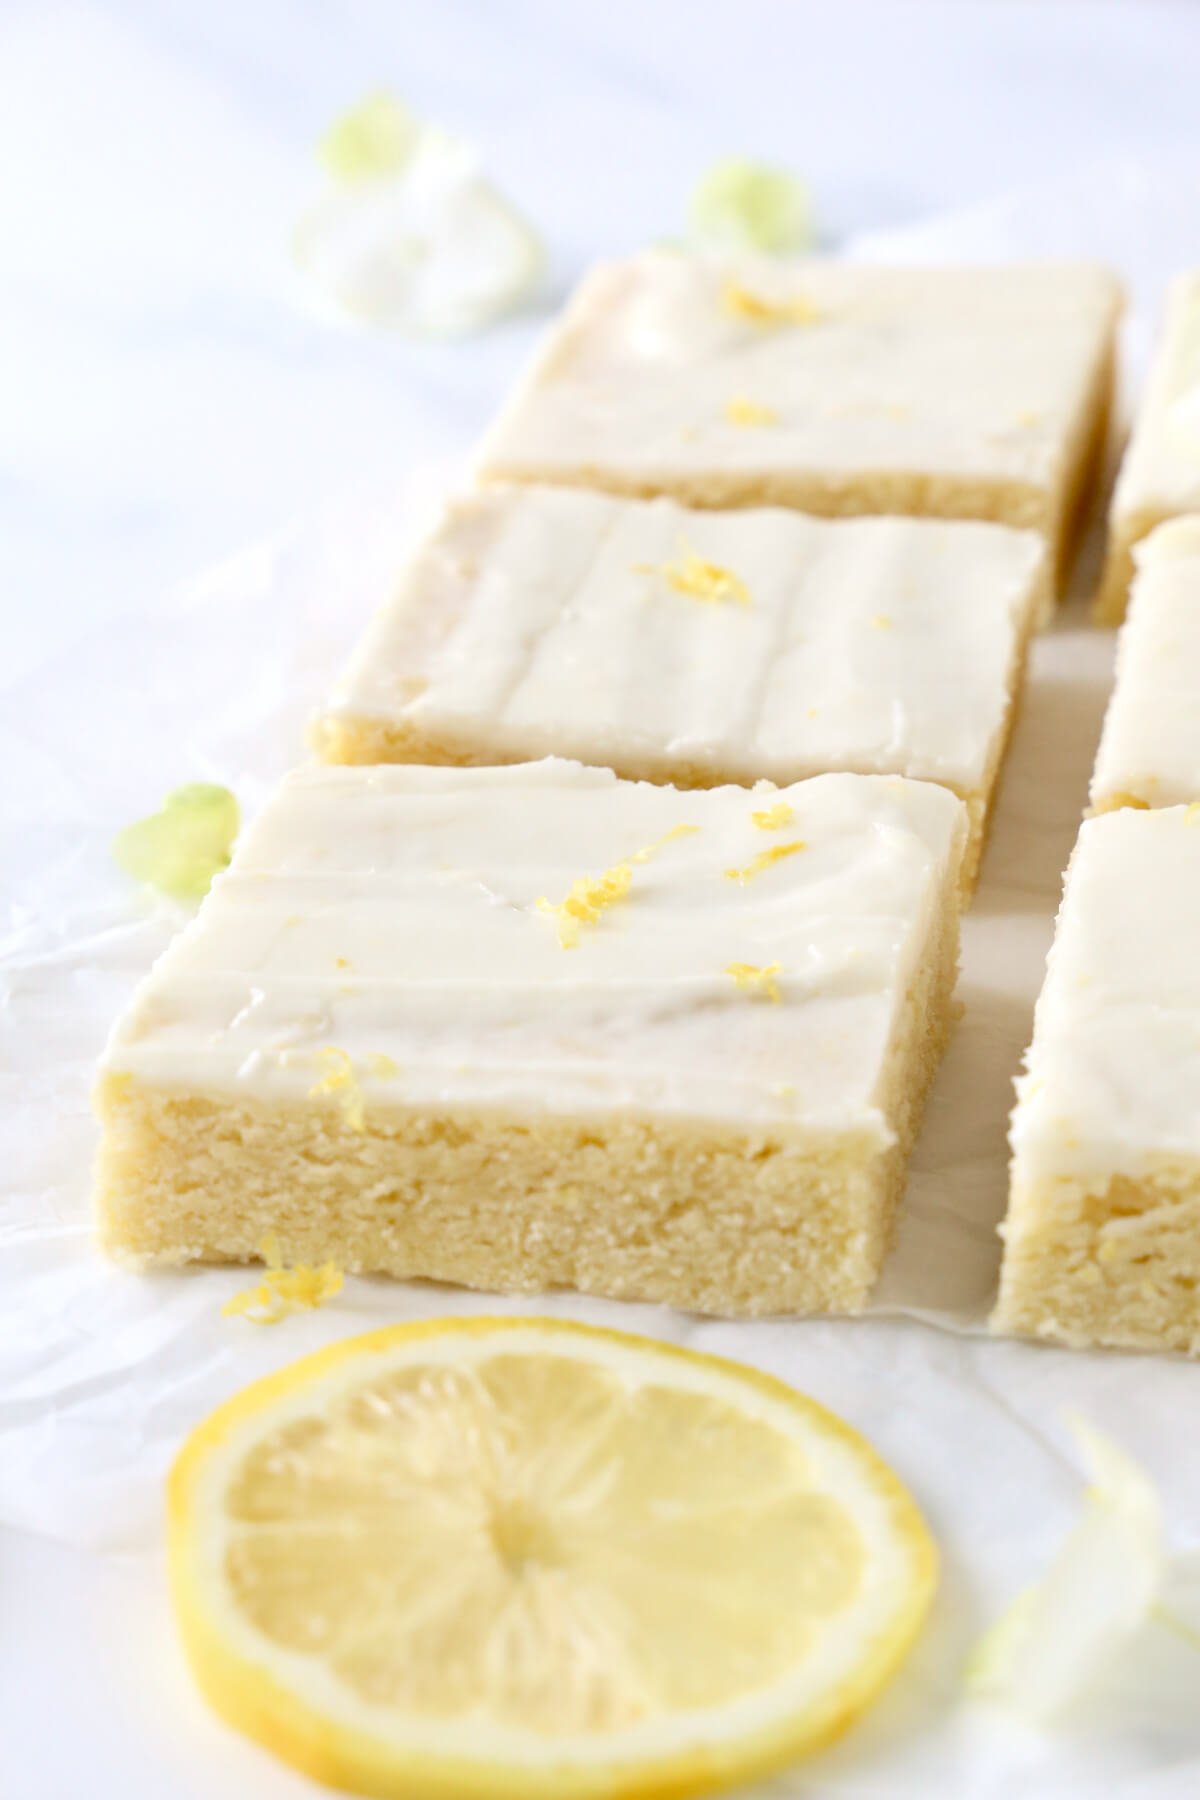 A close up of a cookie square with lemon zest on top.